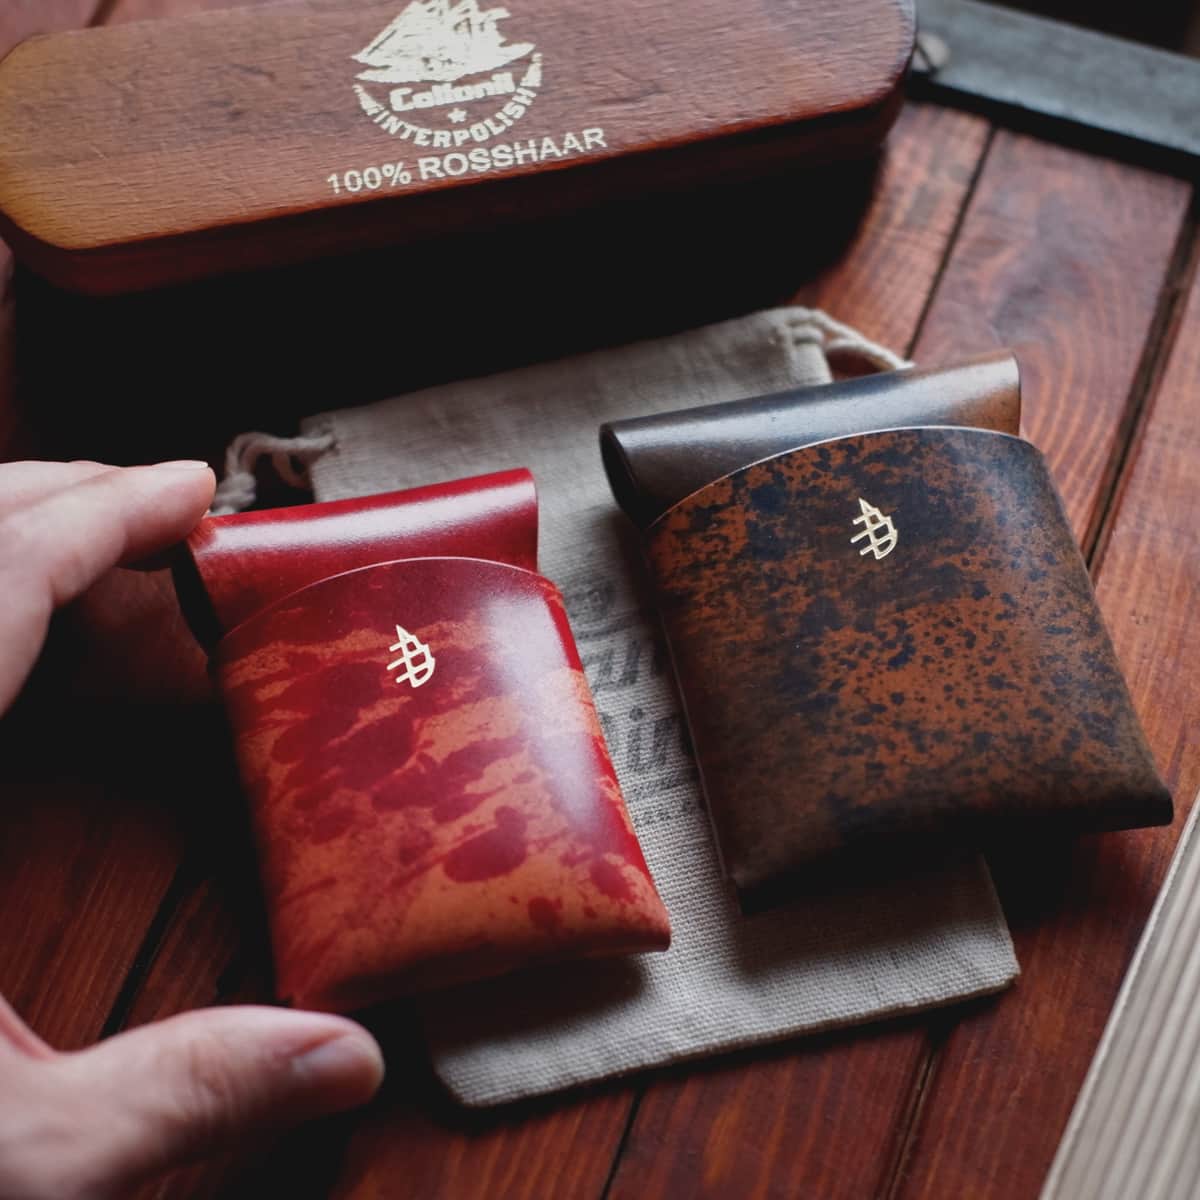 The Mini Lodgepole Stitchless Wallet in Red Rothko Shell Cordovan side by side with The Lodgepole Stitchless Wallet in Blue Rothko Shell Cordovan